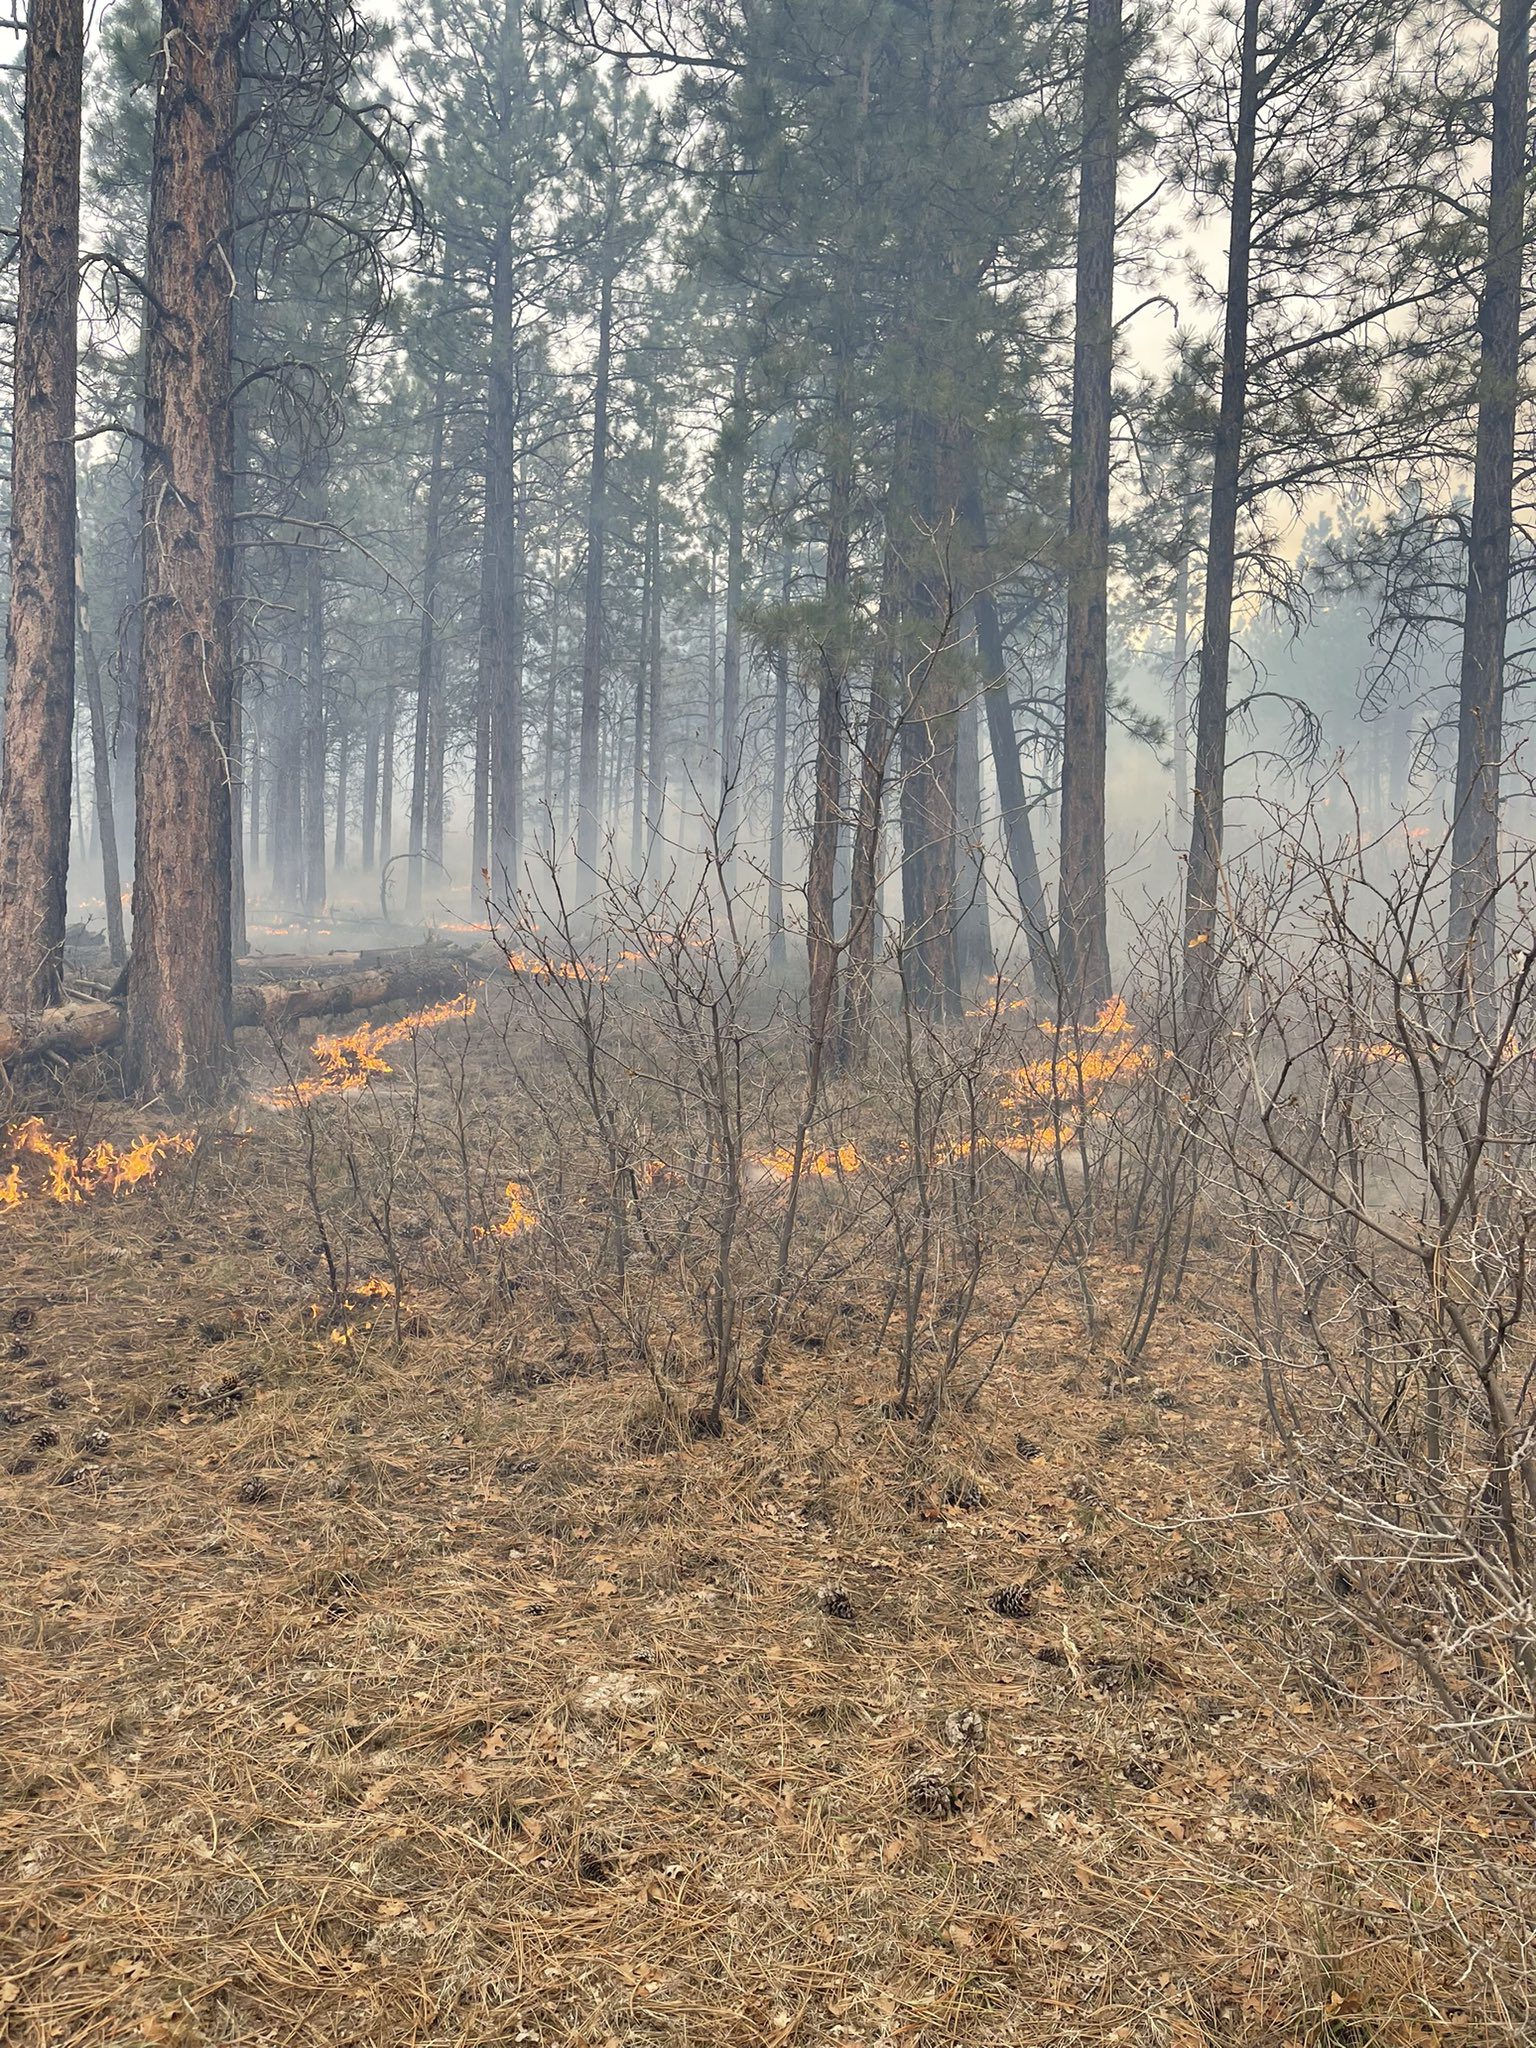 Image from prescribed burn at Park Ridge in the Dixie National Forest.